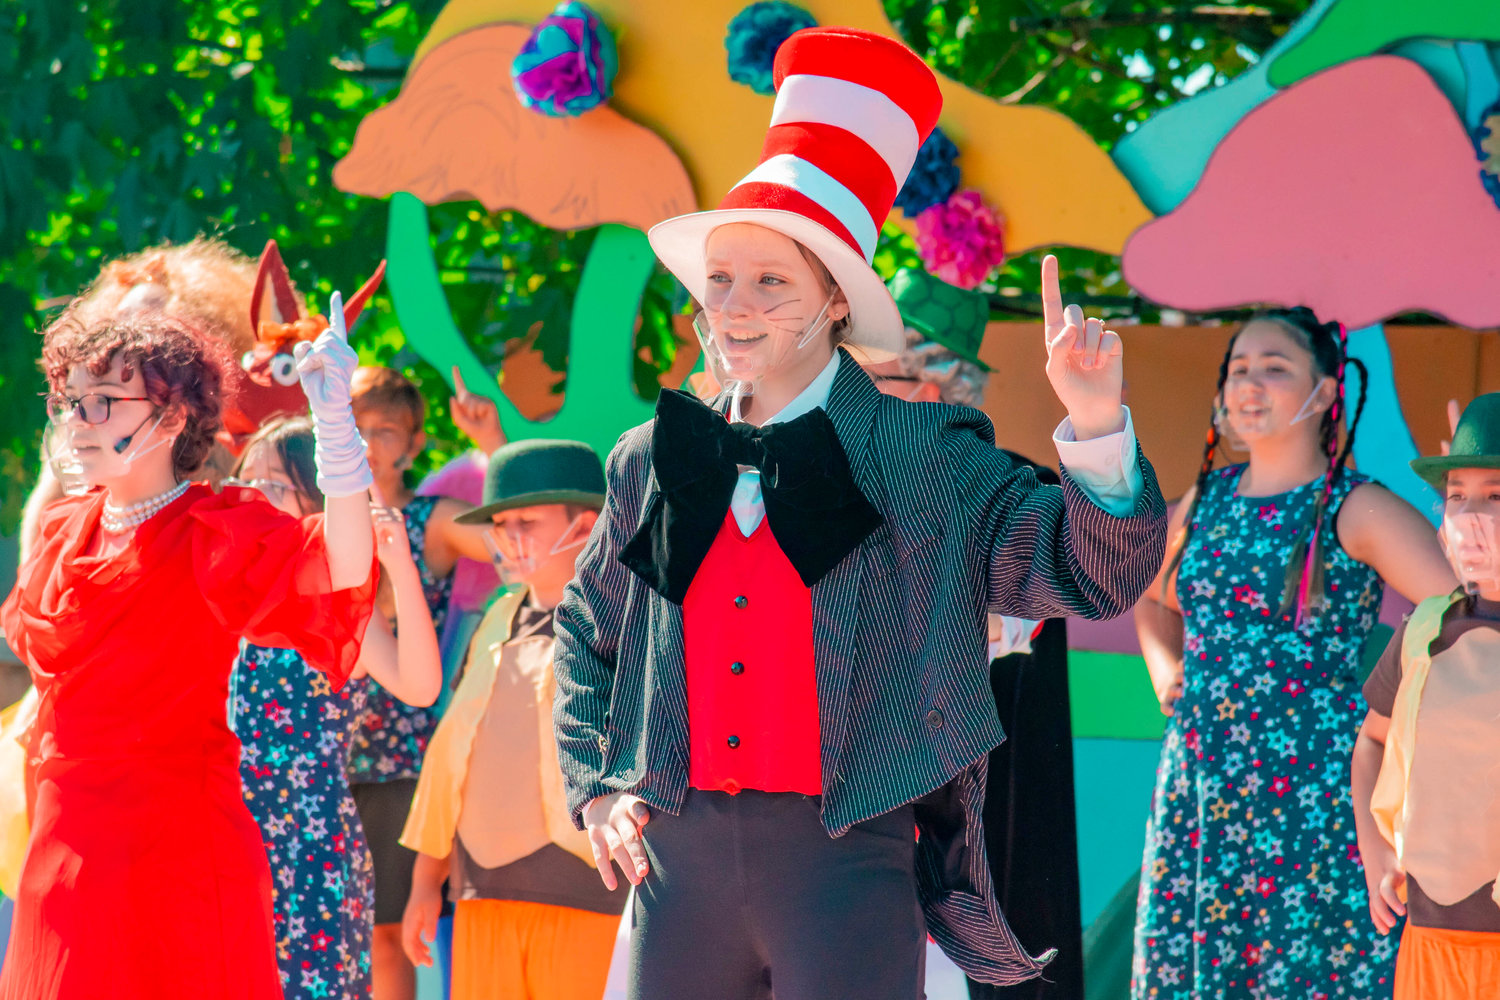 Ari Hannum plays Cat in the Hat during dress rehearsals for “Seussical Jr. the Musical” Wednesday morning at the Evergreen Playhouse in Centralia. The show, directed by Rich Garrett, is based on the works of Dr. Seuss.